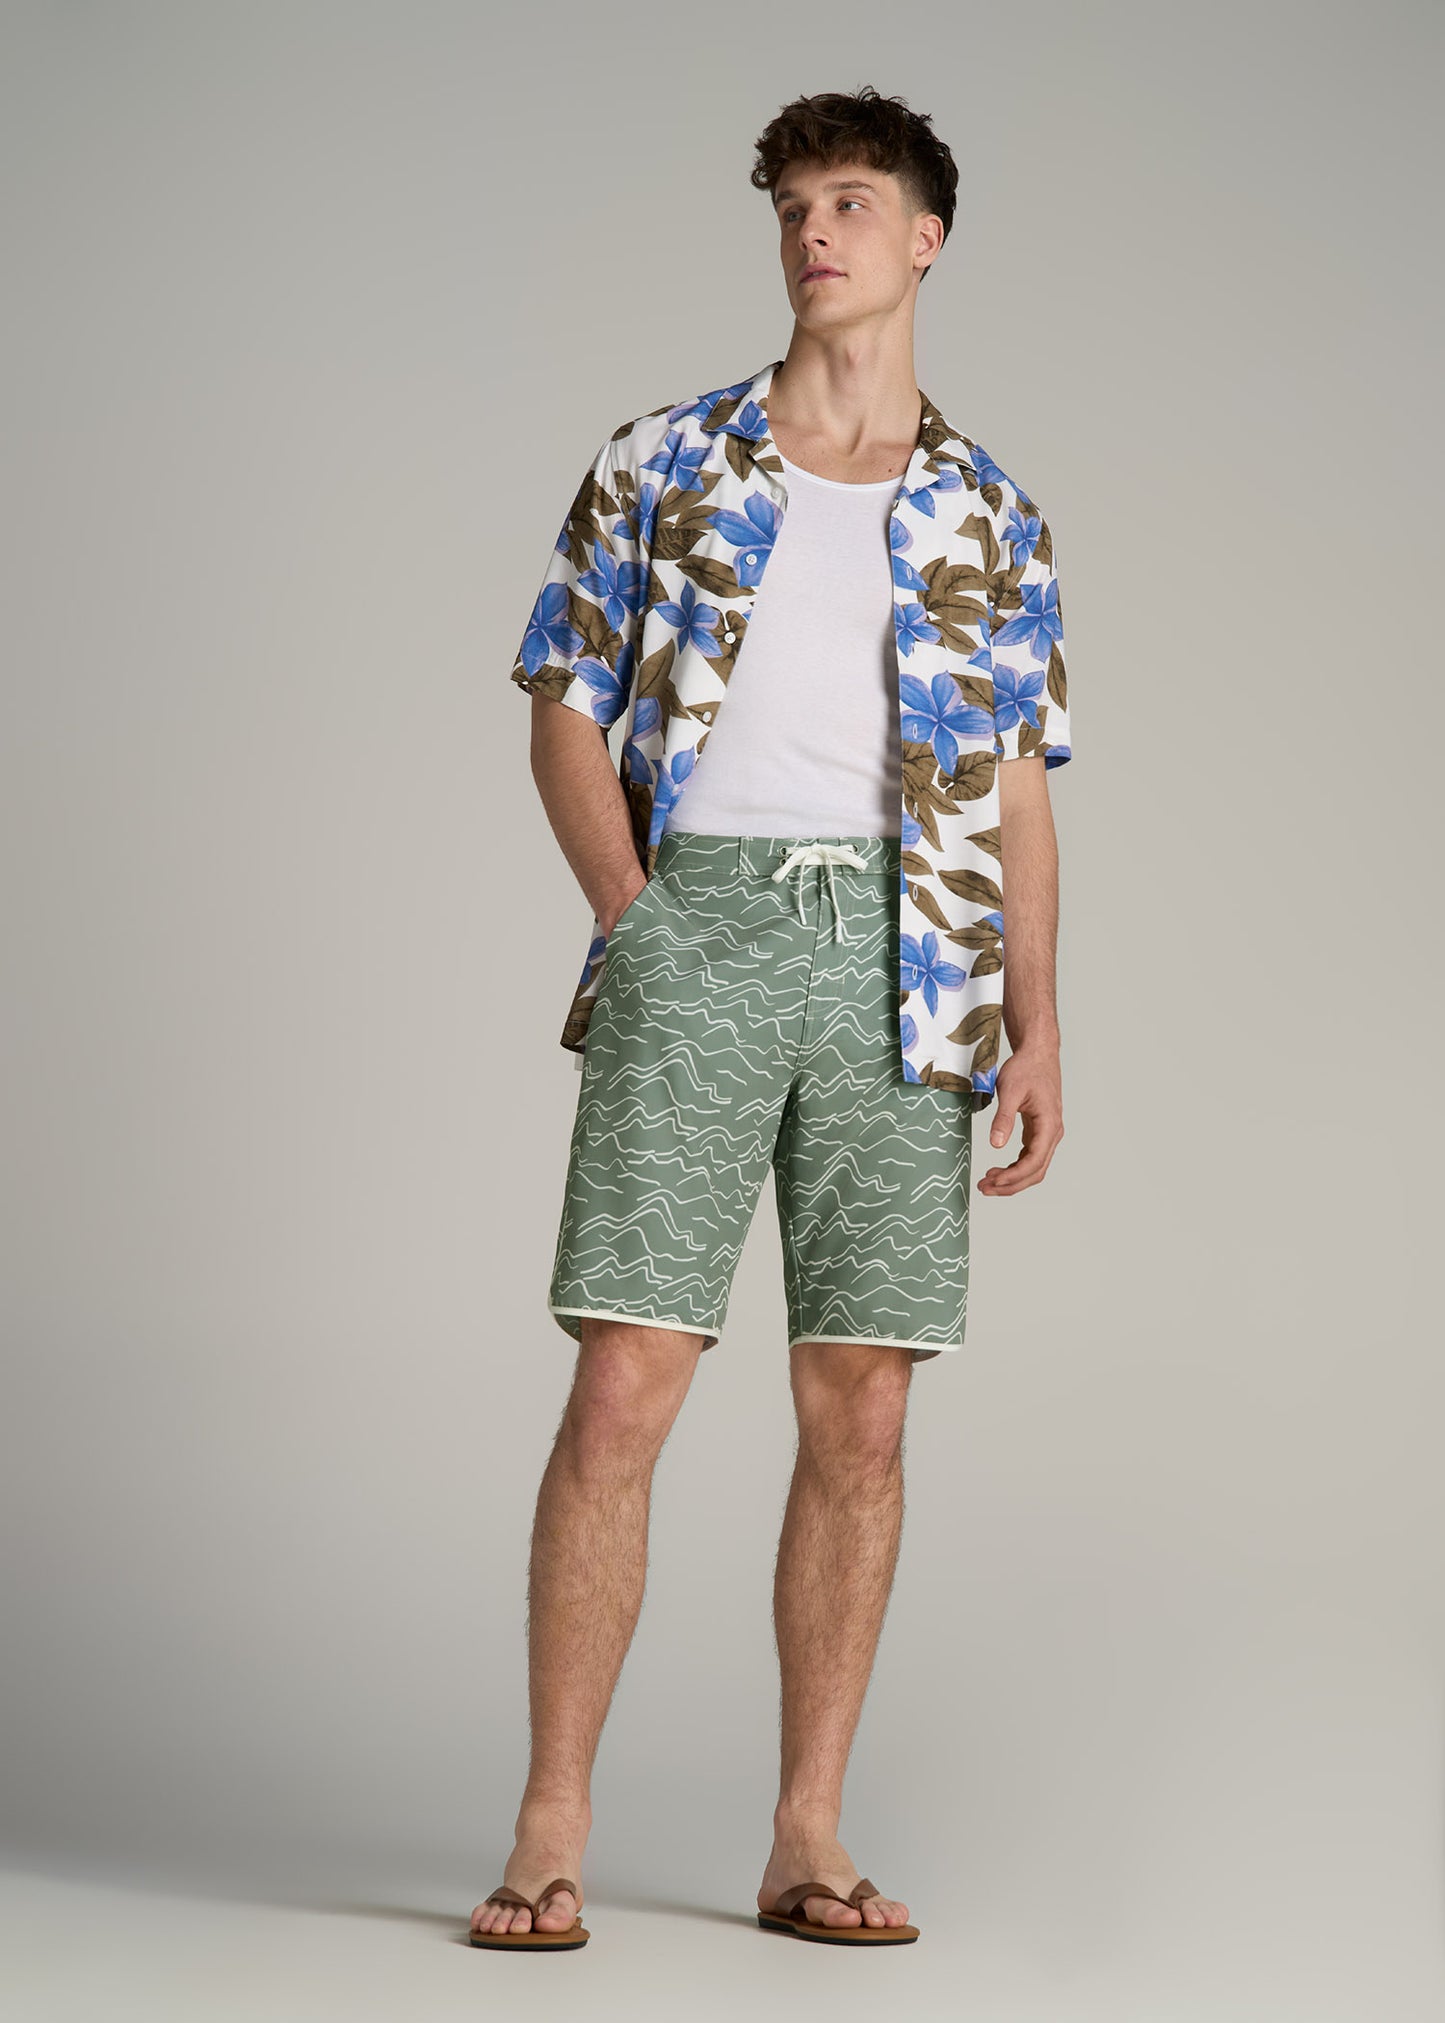 Hi-Tide Scallop Board Shorts for Tall Men in Green Current